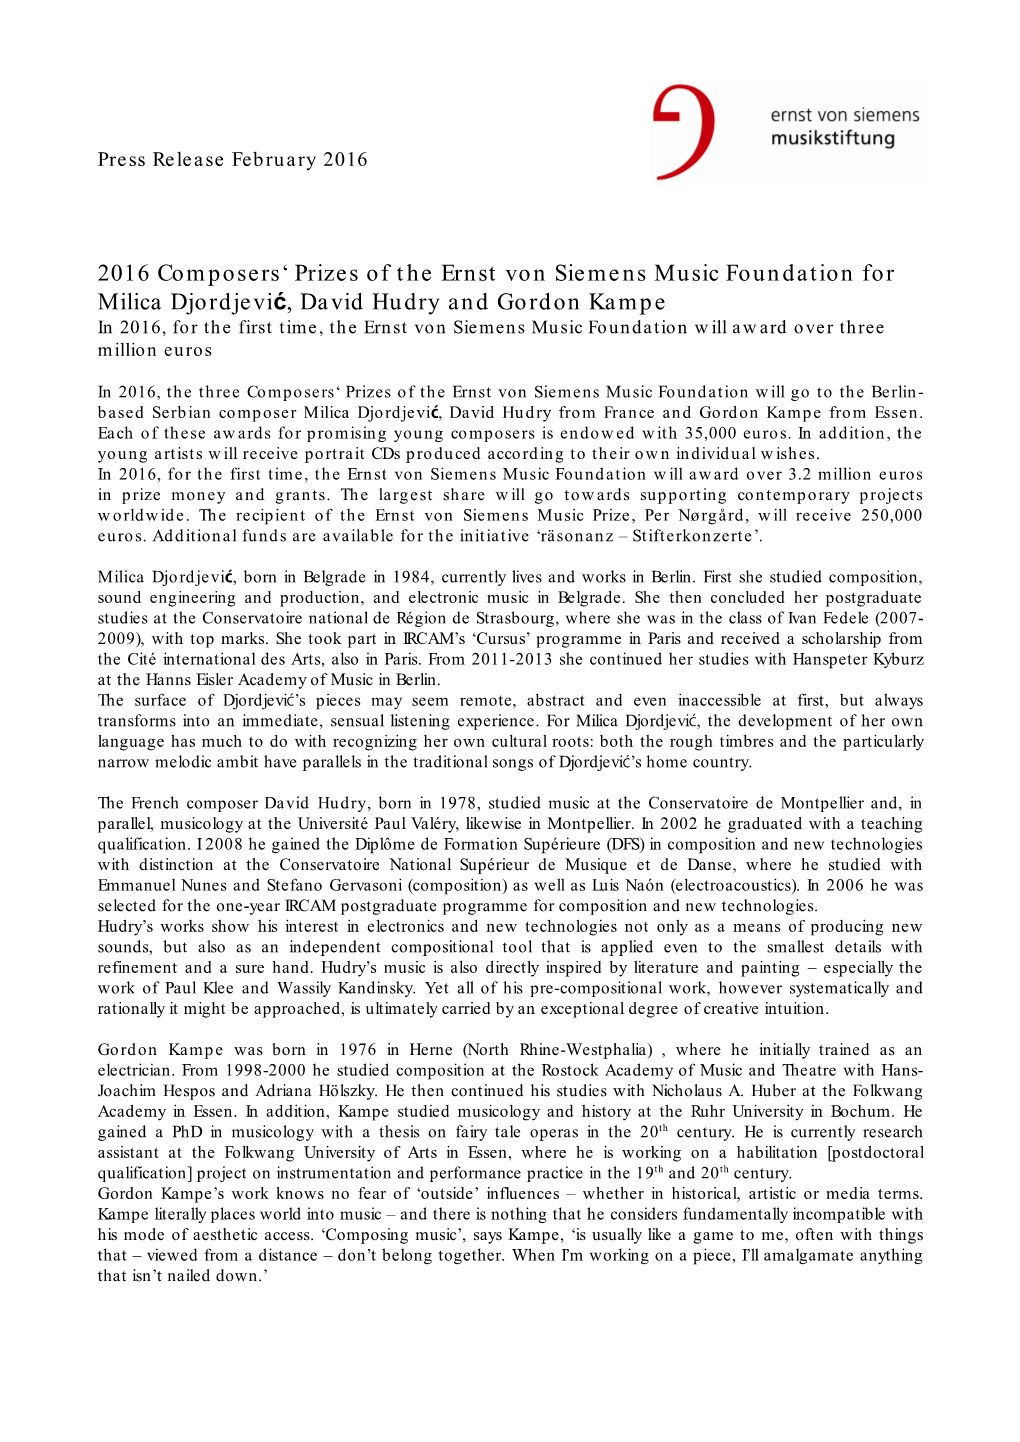 2016 Composers' Prizes of the Ernst Von Siemens Music Foundation For